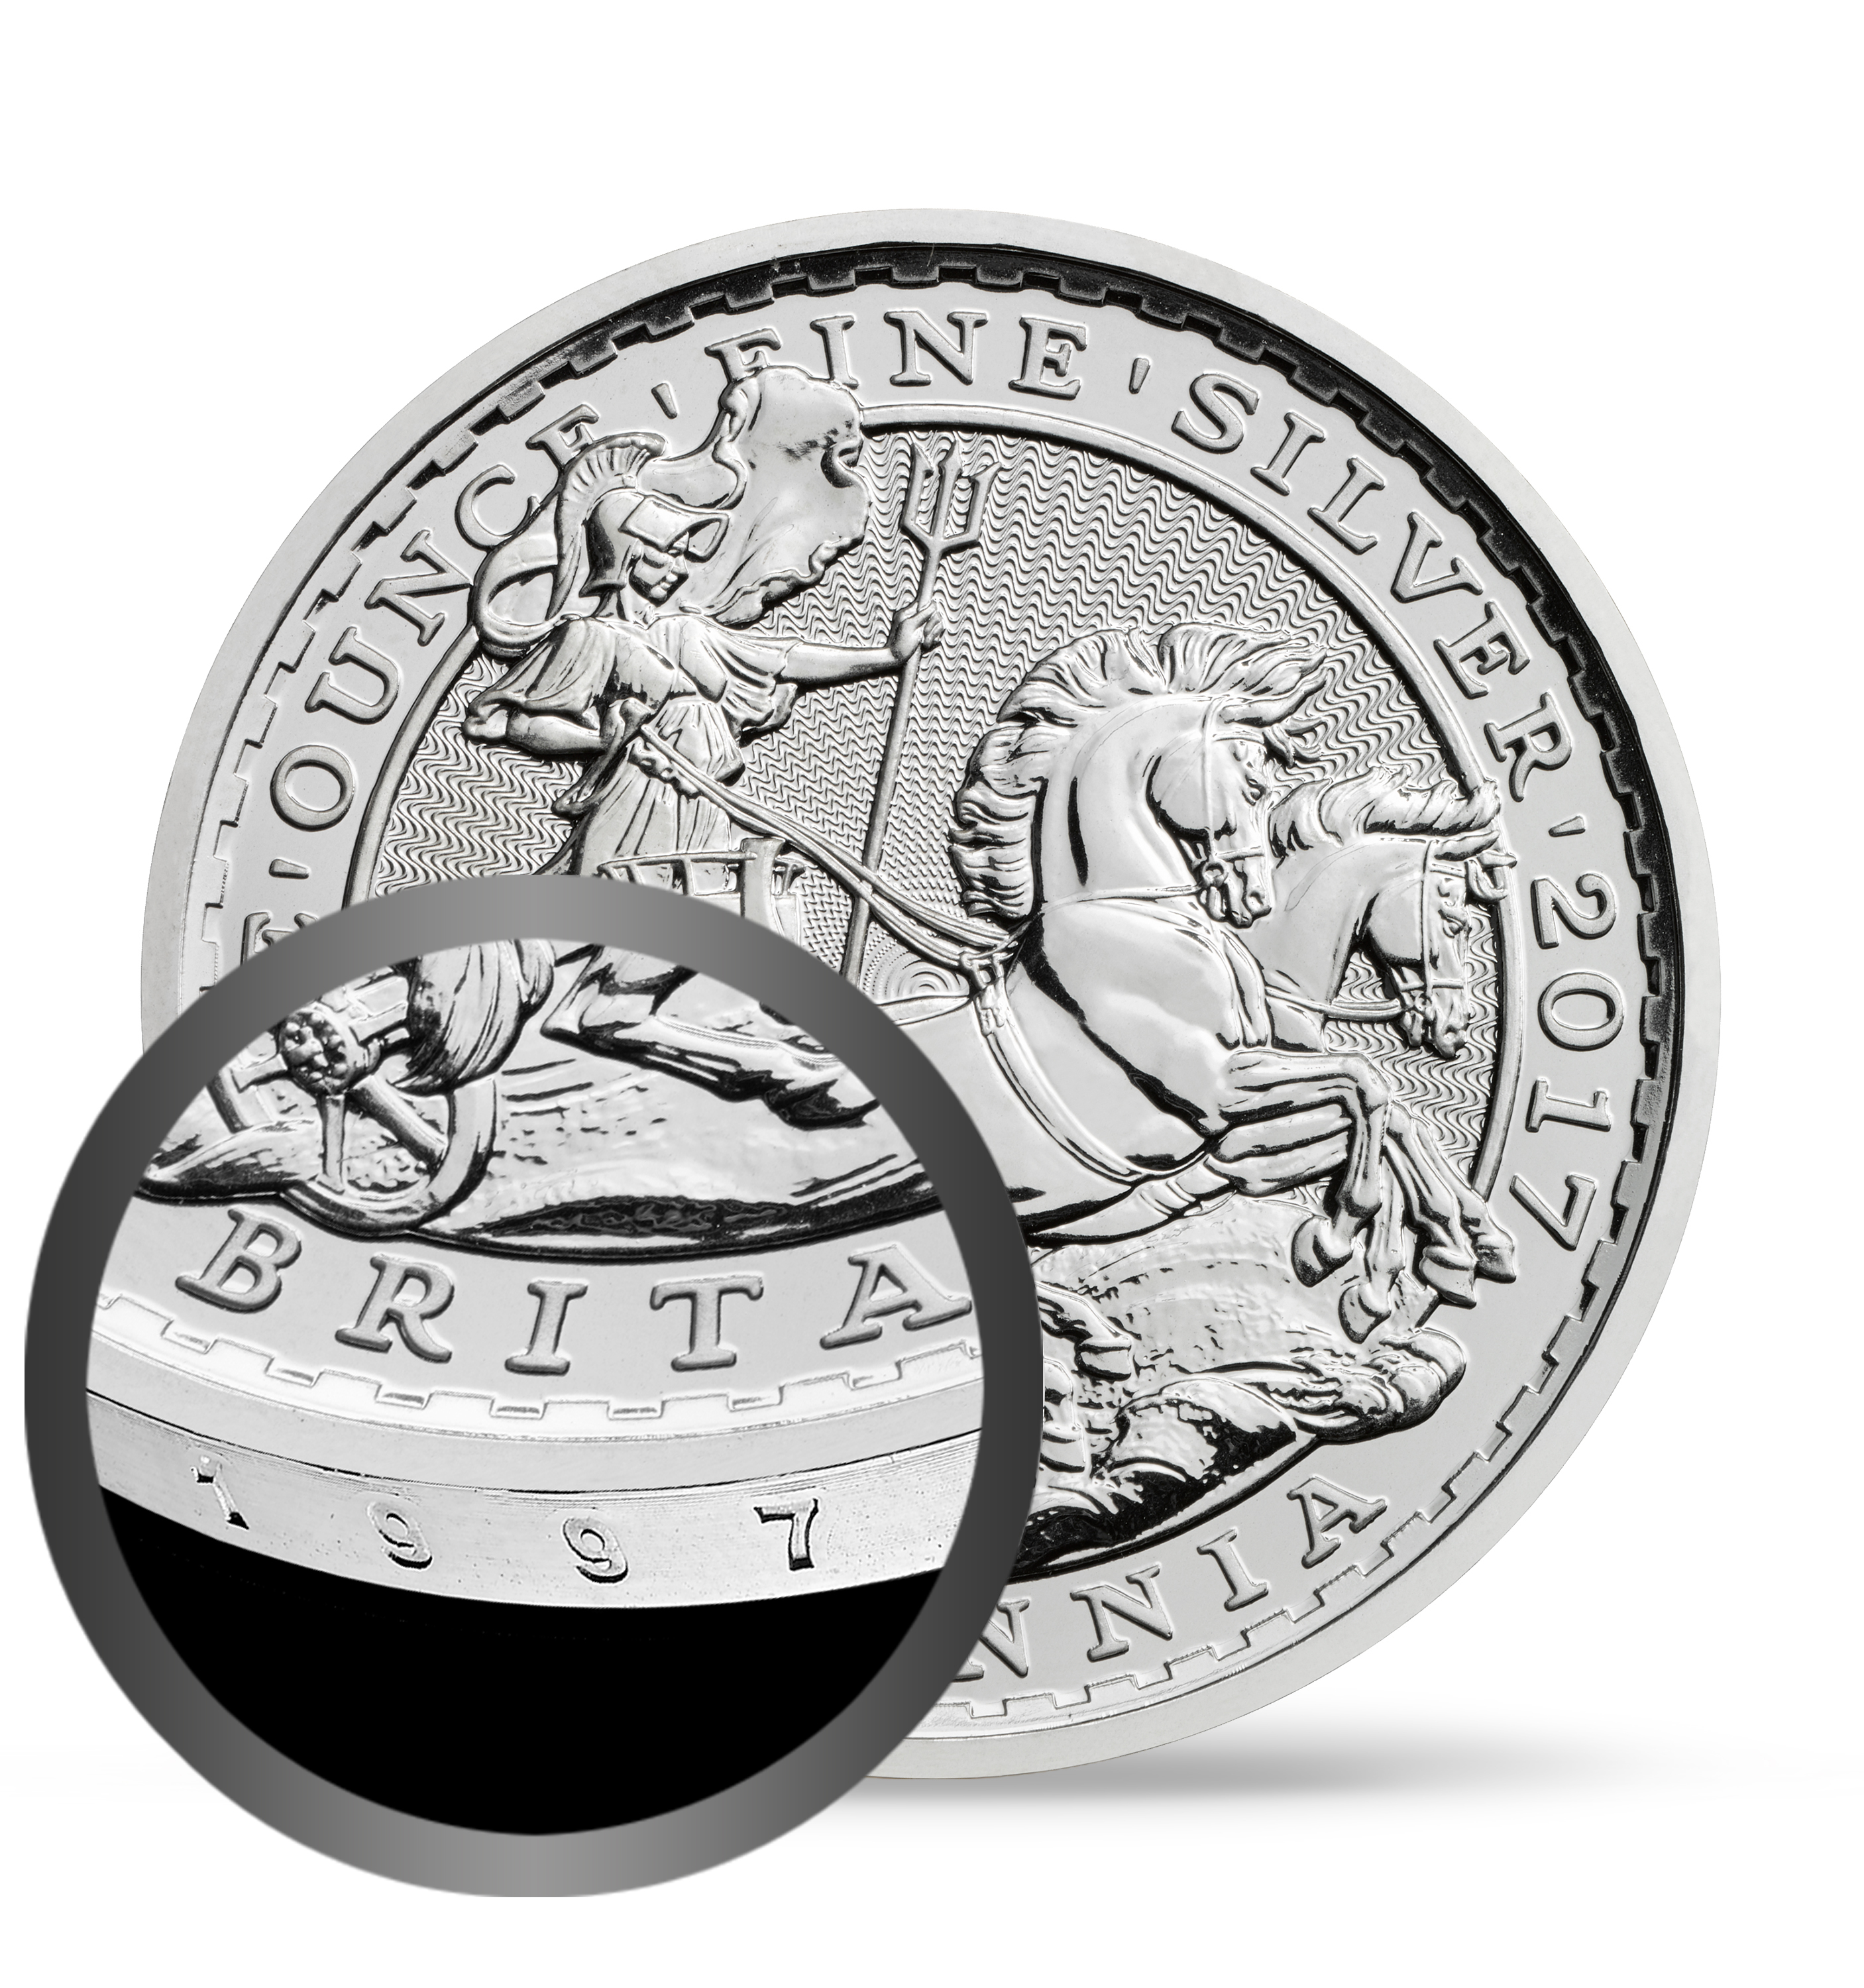 British Silver Coins Archives - Goldco